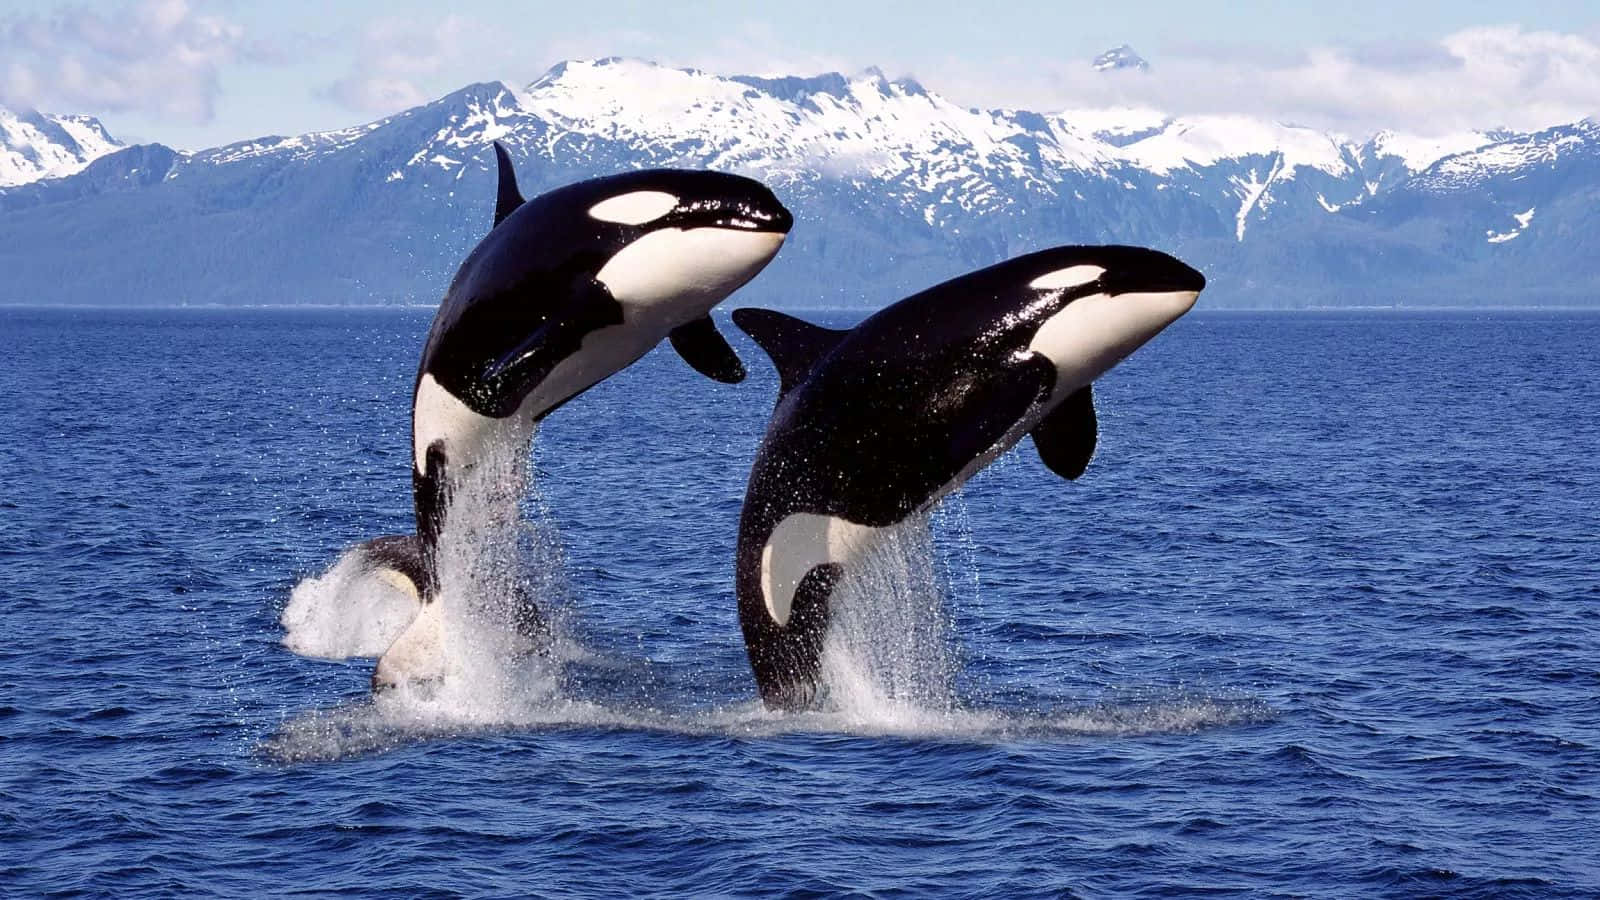 Breaching Orca Whaleswith Mountain Backdrop Wallpaper